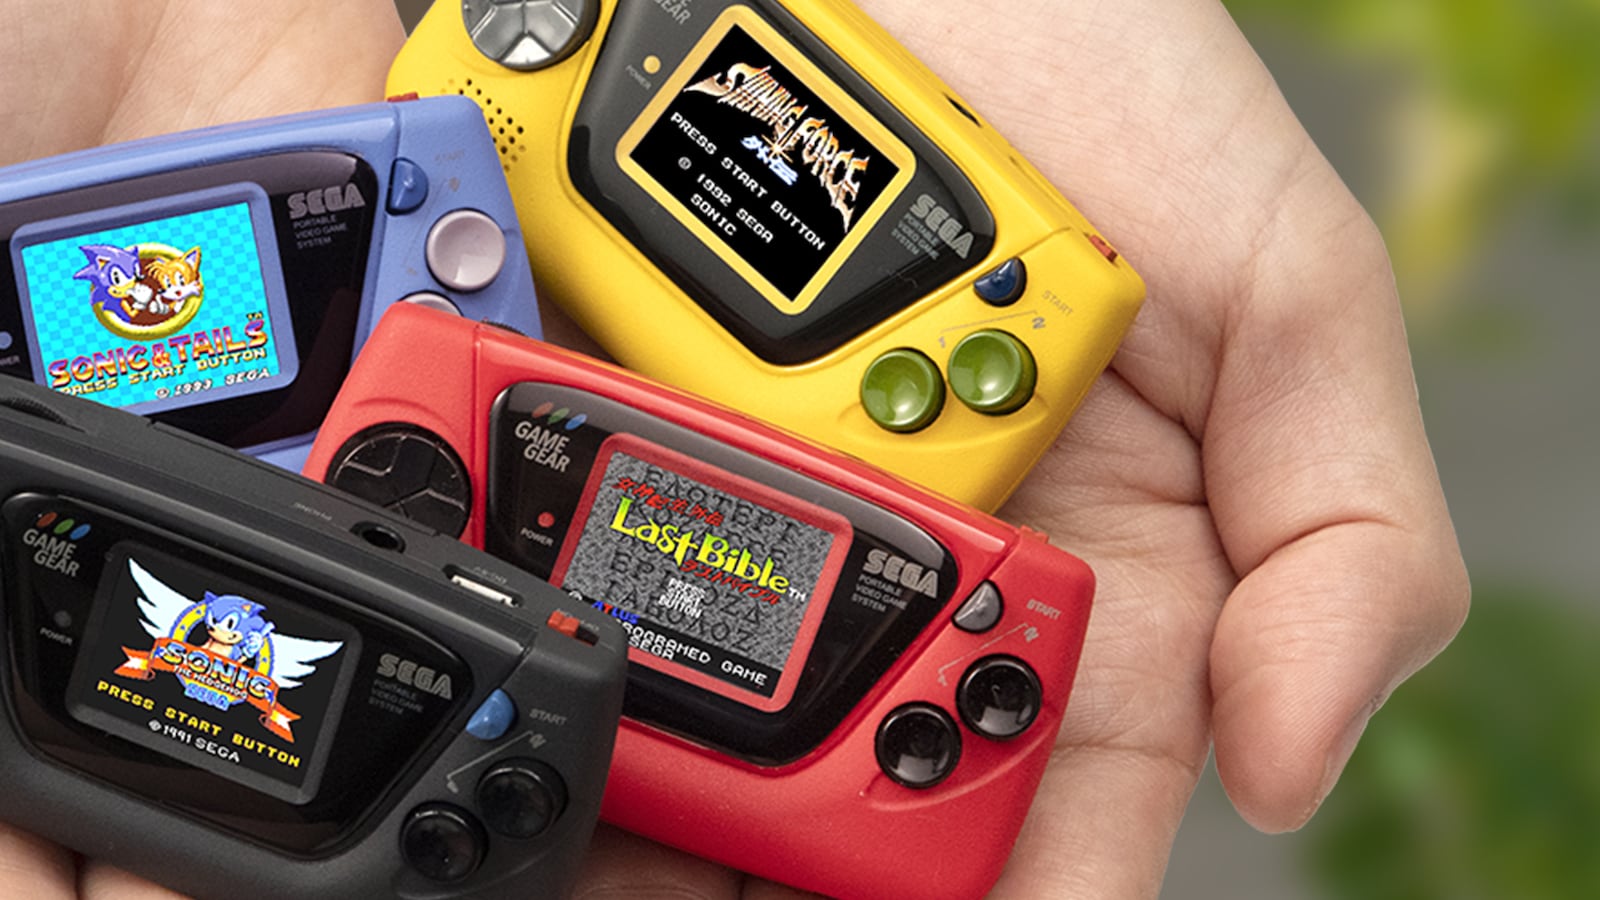 Sega Game Gear Micro Gaming Portable comes with 4 built-in games